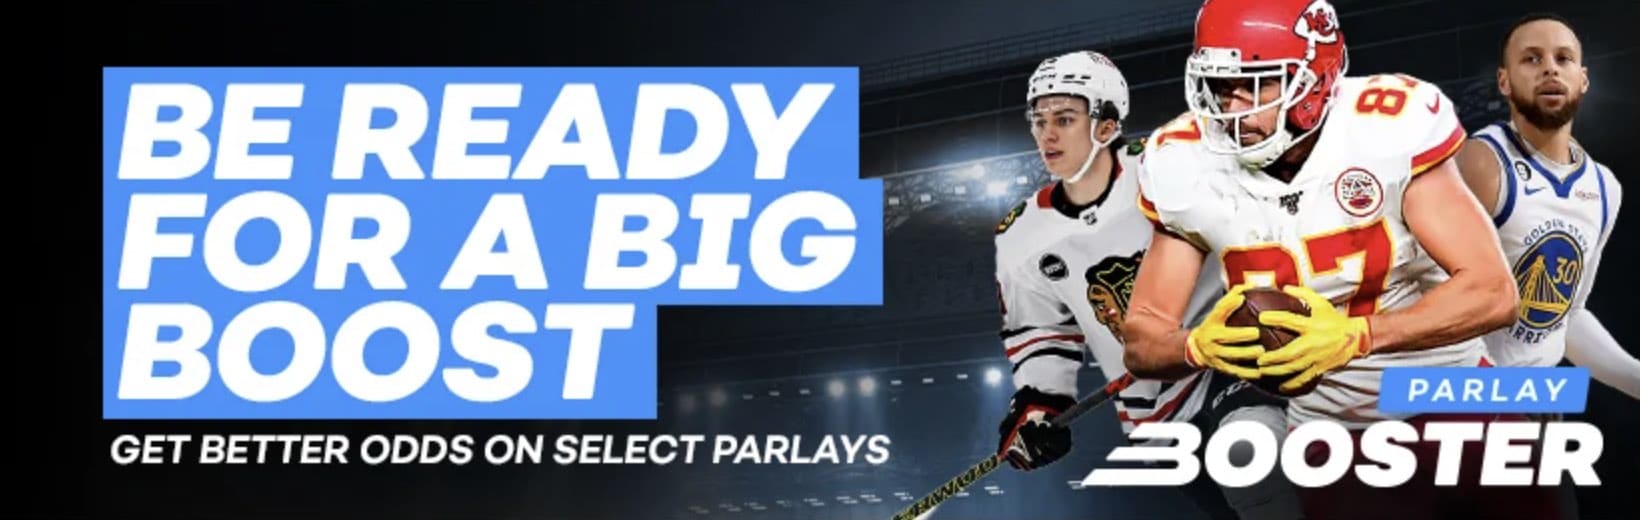 A screenshot of the banner ad for the Parlay Booster offer at the Bovada betting site